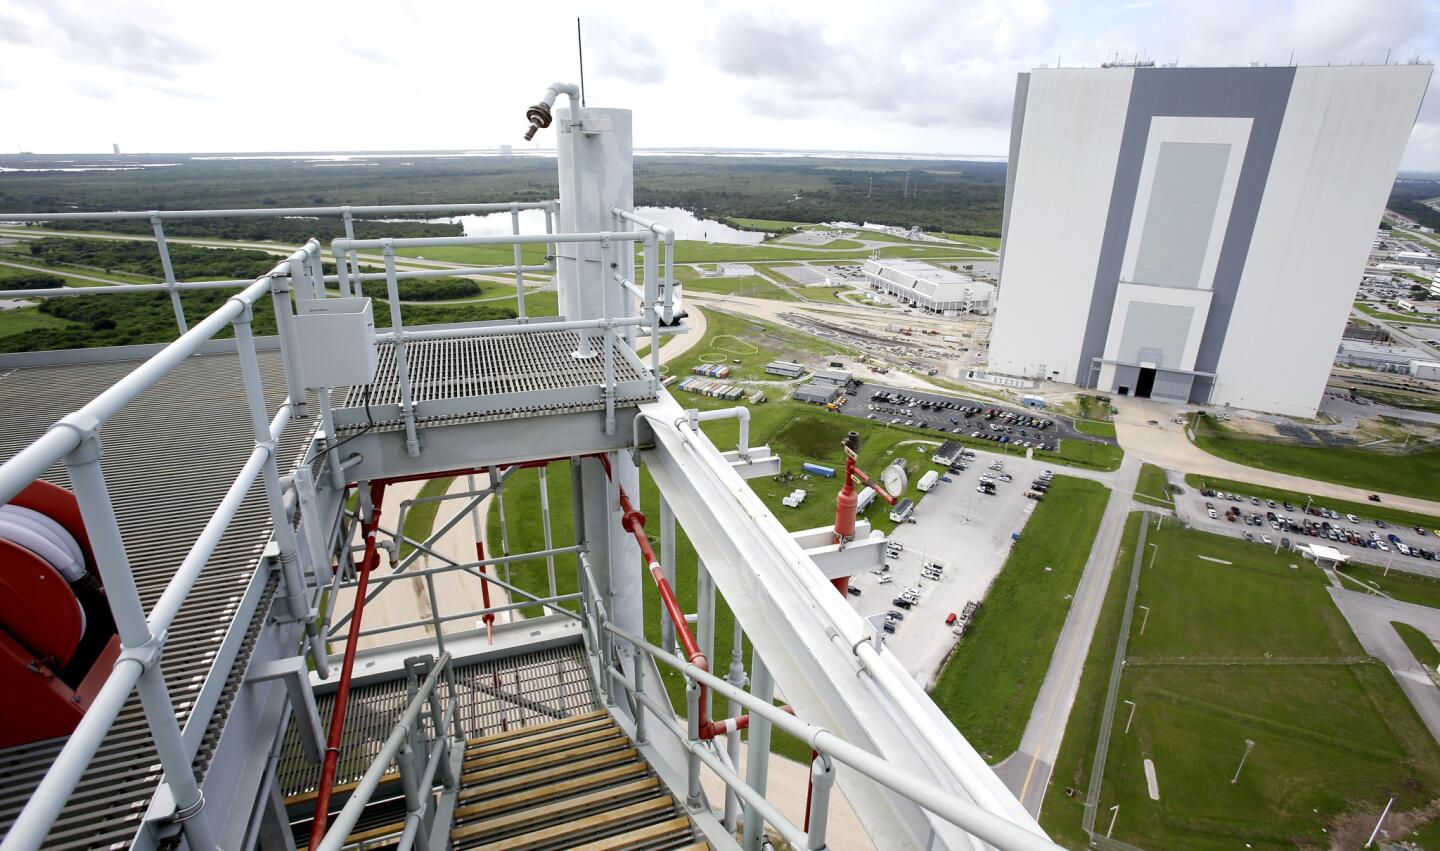 A view of the Vehicle Assembly Building, right, is seen from atop the over 400 foot high mobile launcher structure that will support NASA's Space Launch System (SLS) at the Kennedy Space Center is seen, Wednesday, Aug. 19, 2015, in Cape Canaveral, Fla. SLS is the agency’s new rocket that will launch astronauts in the Orion spacecraft on missions to an asteroid and eventually to Mars. (AP Photo/John Raoux) ORG XMIT: KSC103